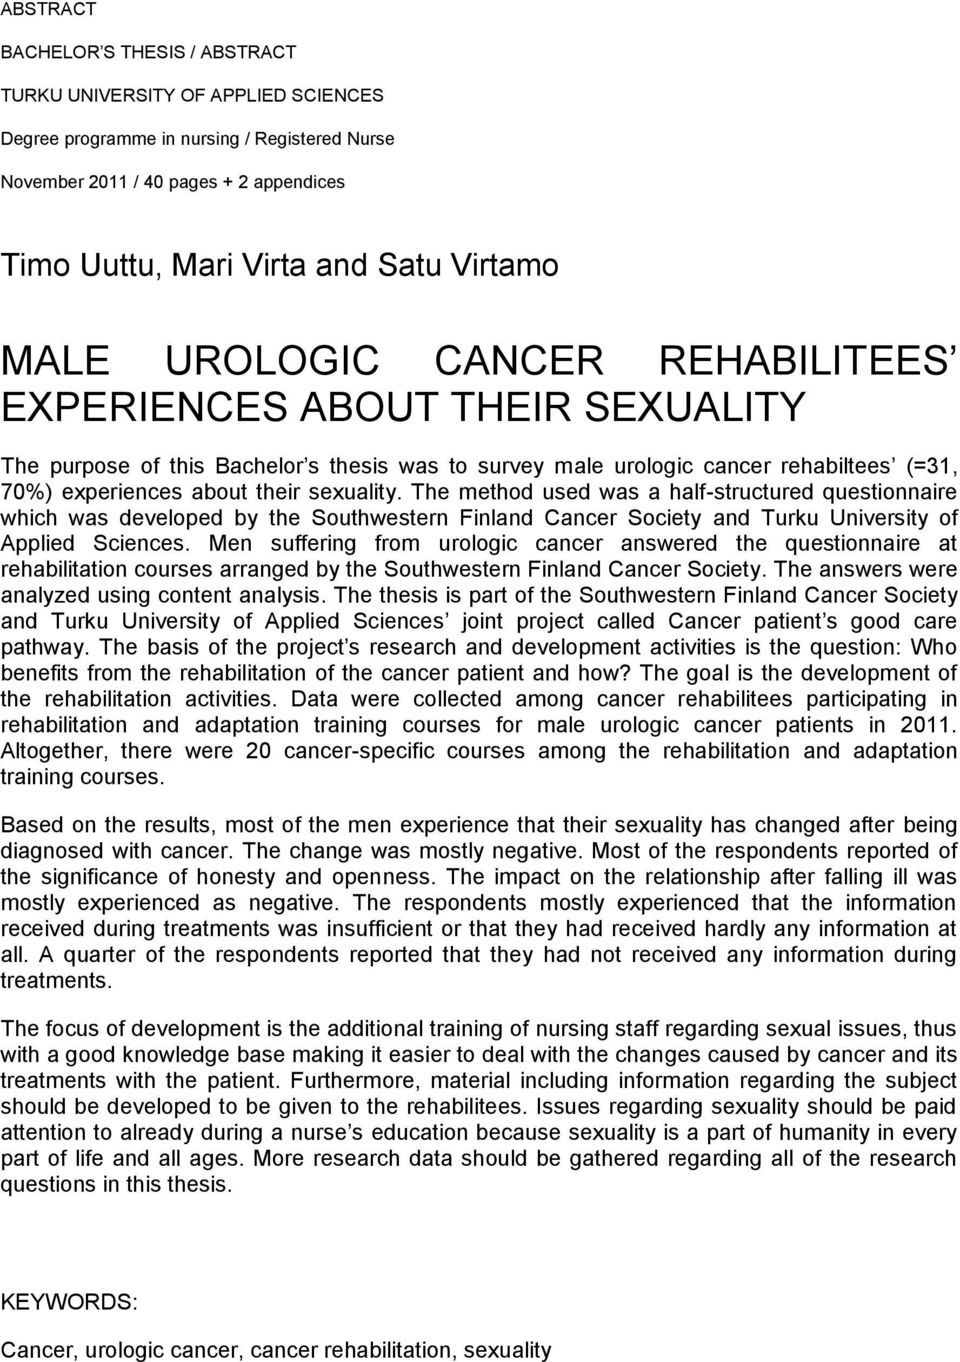 sexuality. The method used was a half-structured questionnaire which was developed by the Southwestern Finland Cancer Society and Turku University of Applied Sciences.